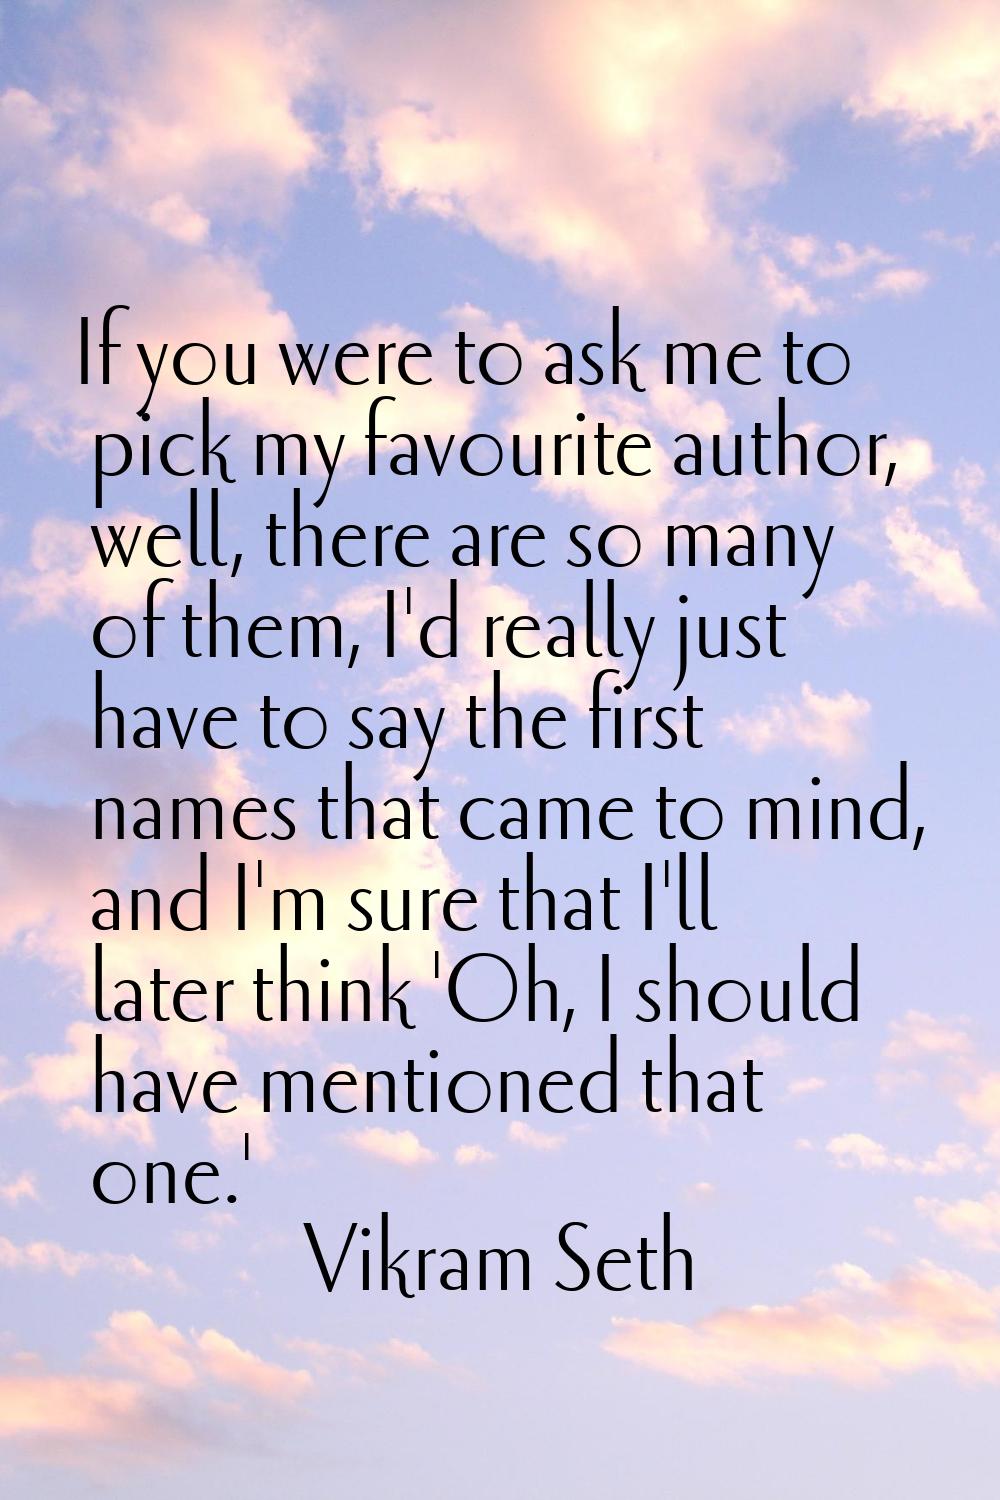 If you were to ask me to pick my favourite author, well, there are so many of them, I'd really just